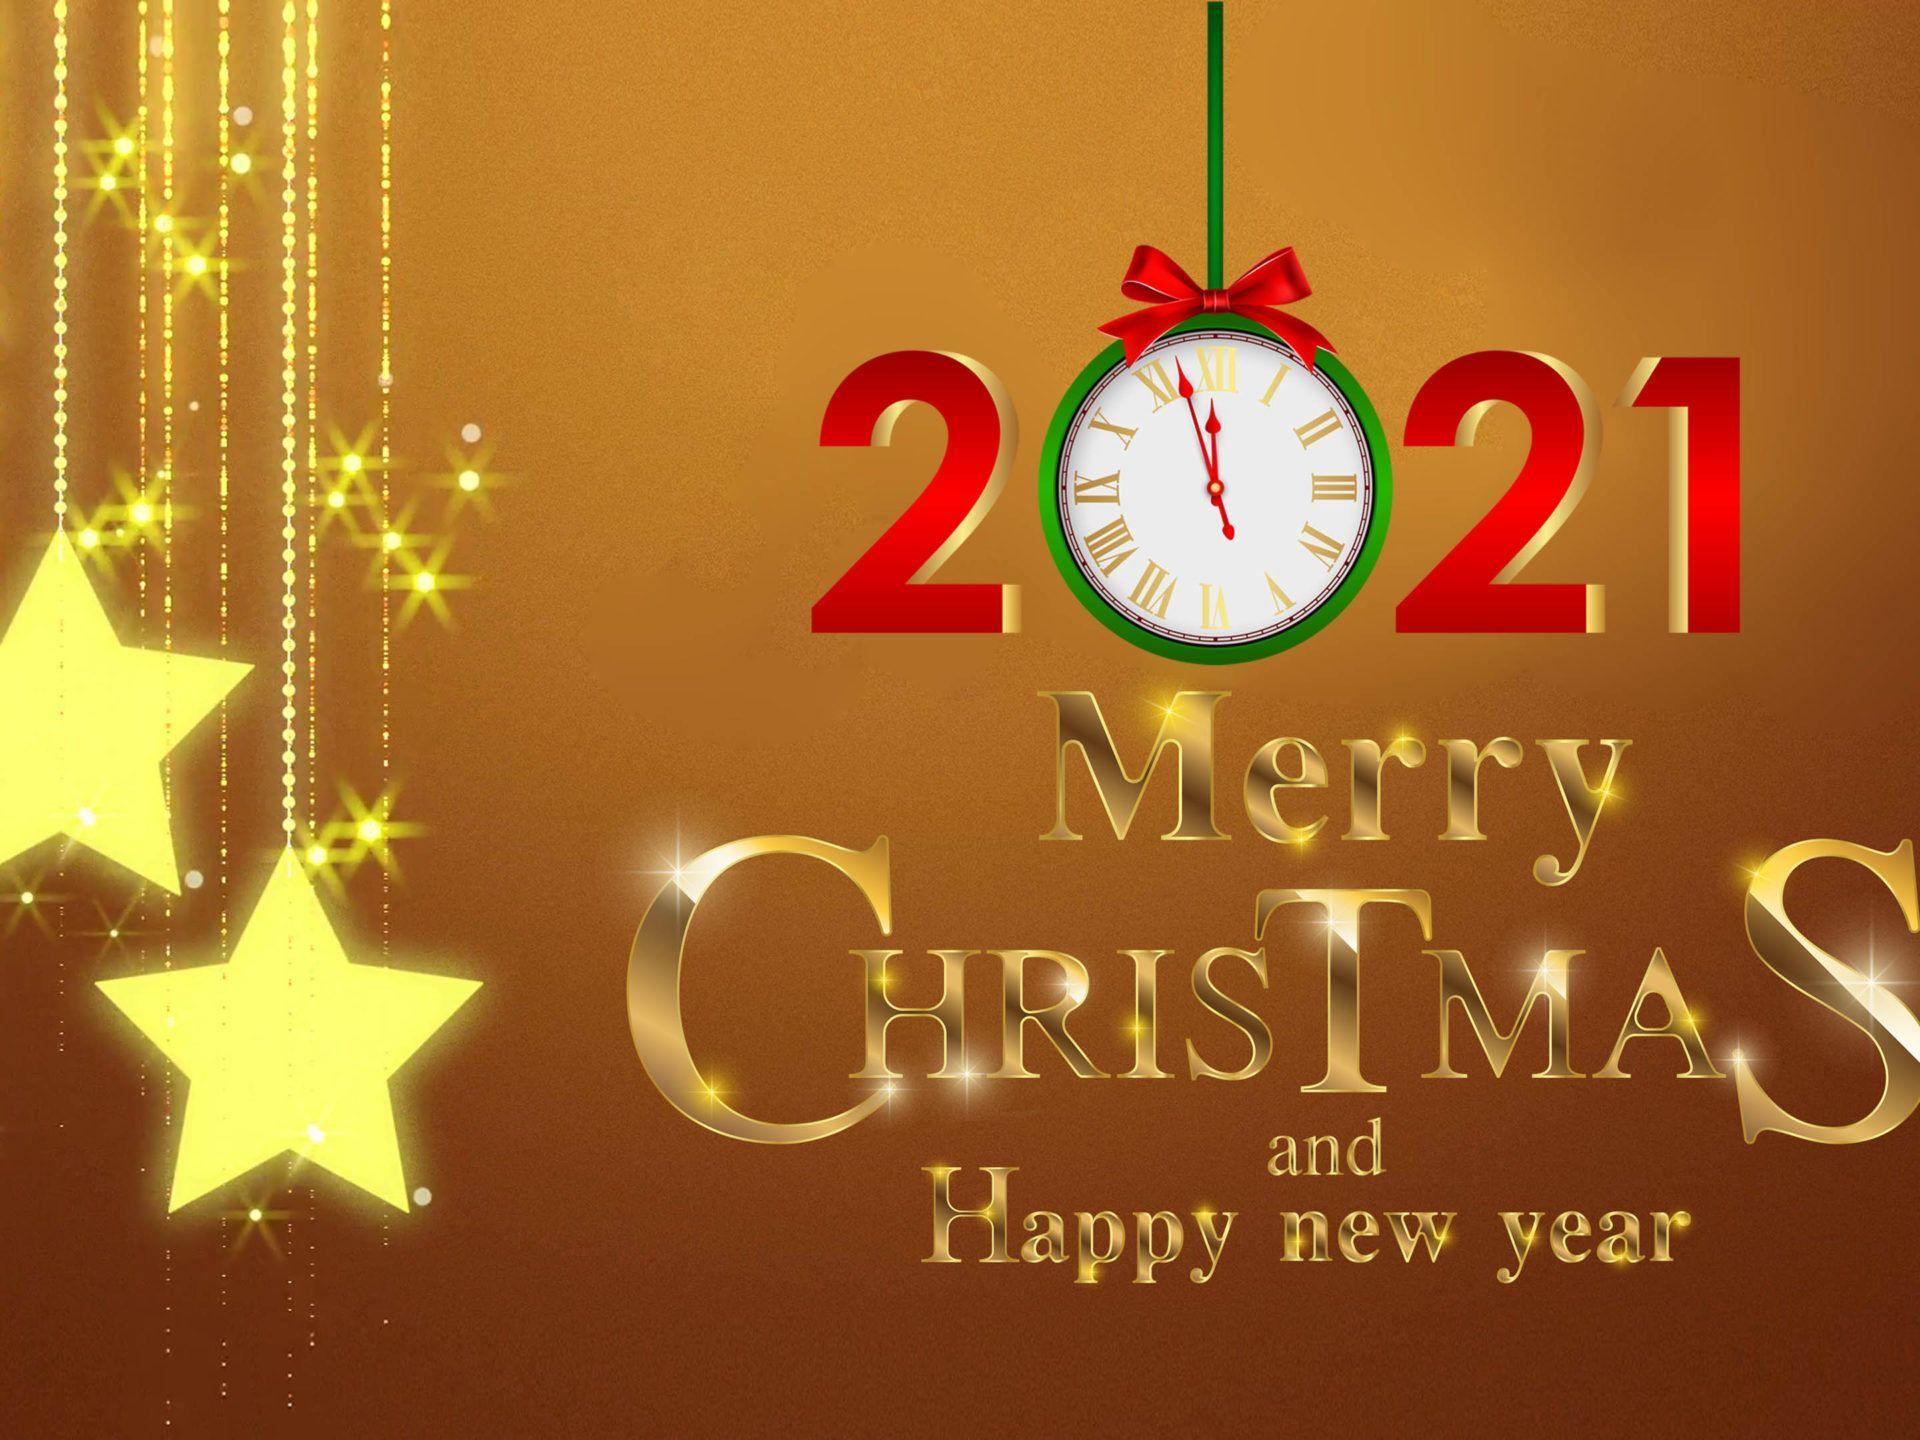 Merry Christmas Hd Images 2021 : Merry Christmas 2021: Wishes, Images ...